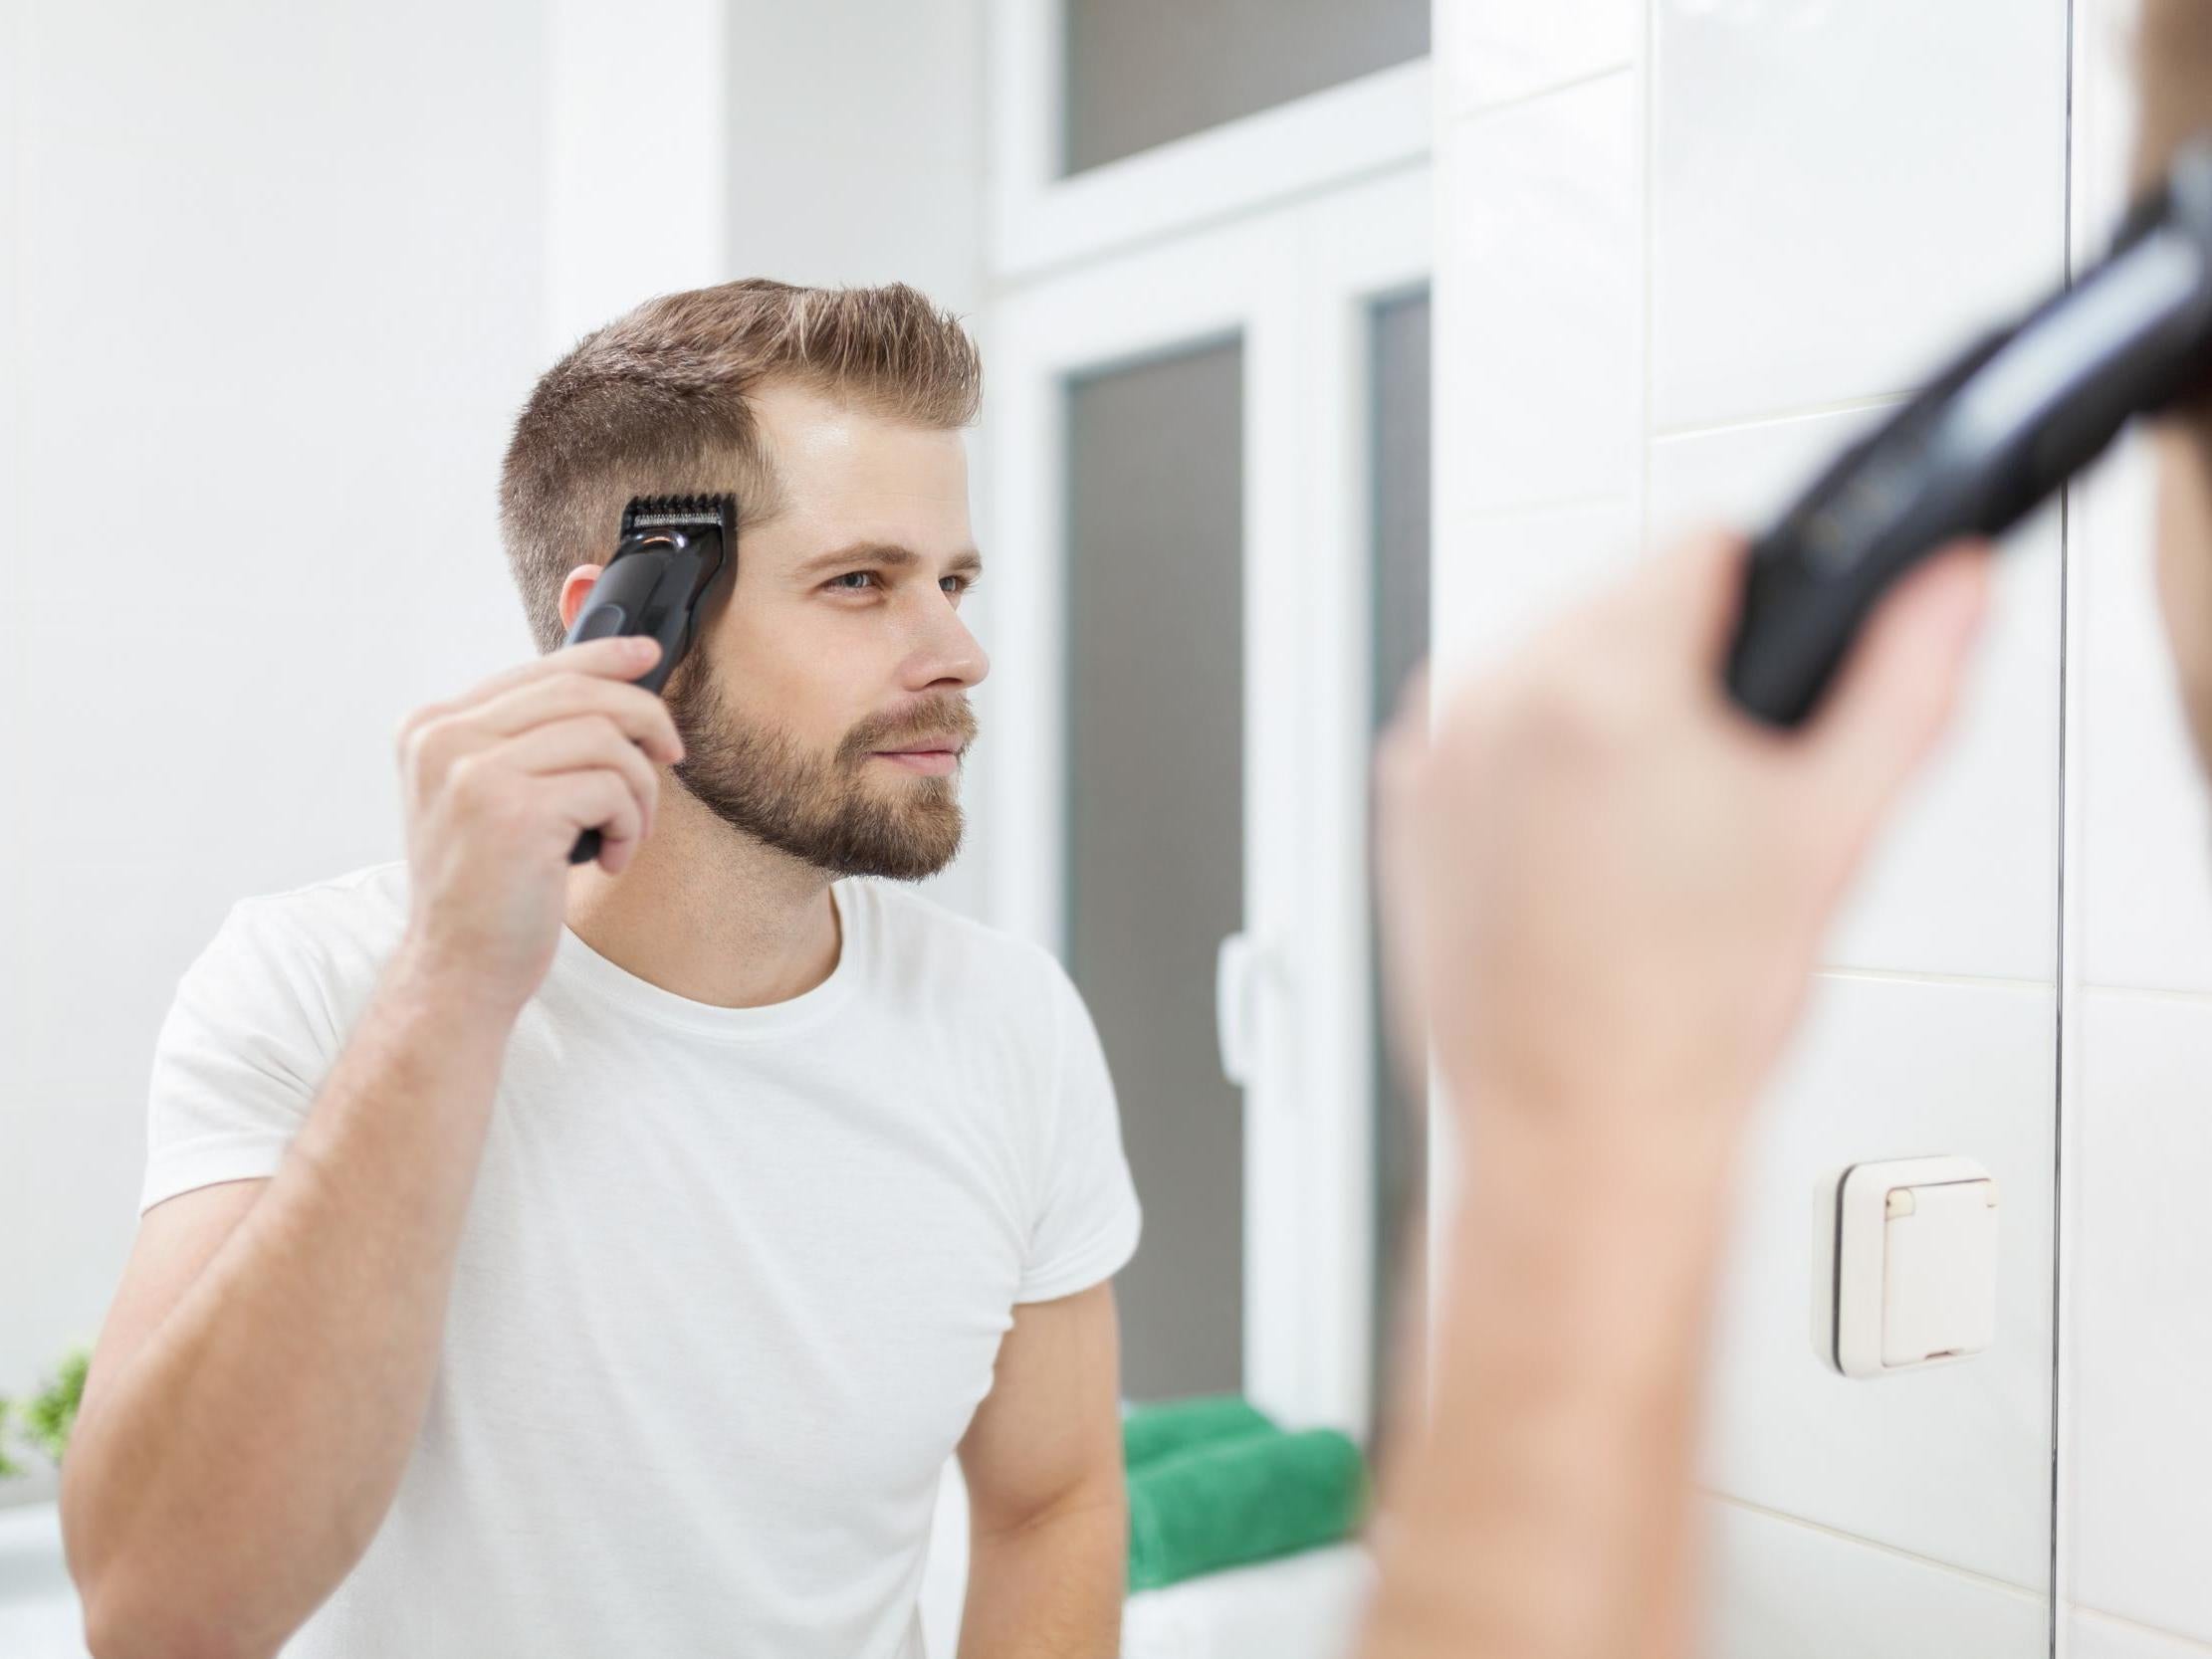 Haircuts at home: How to do men's hair with clippers | The Independent